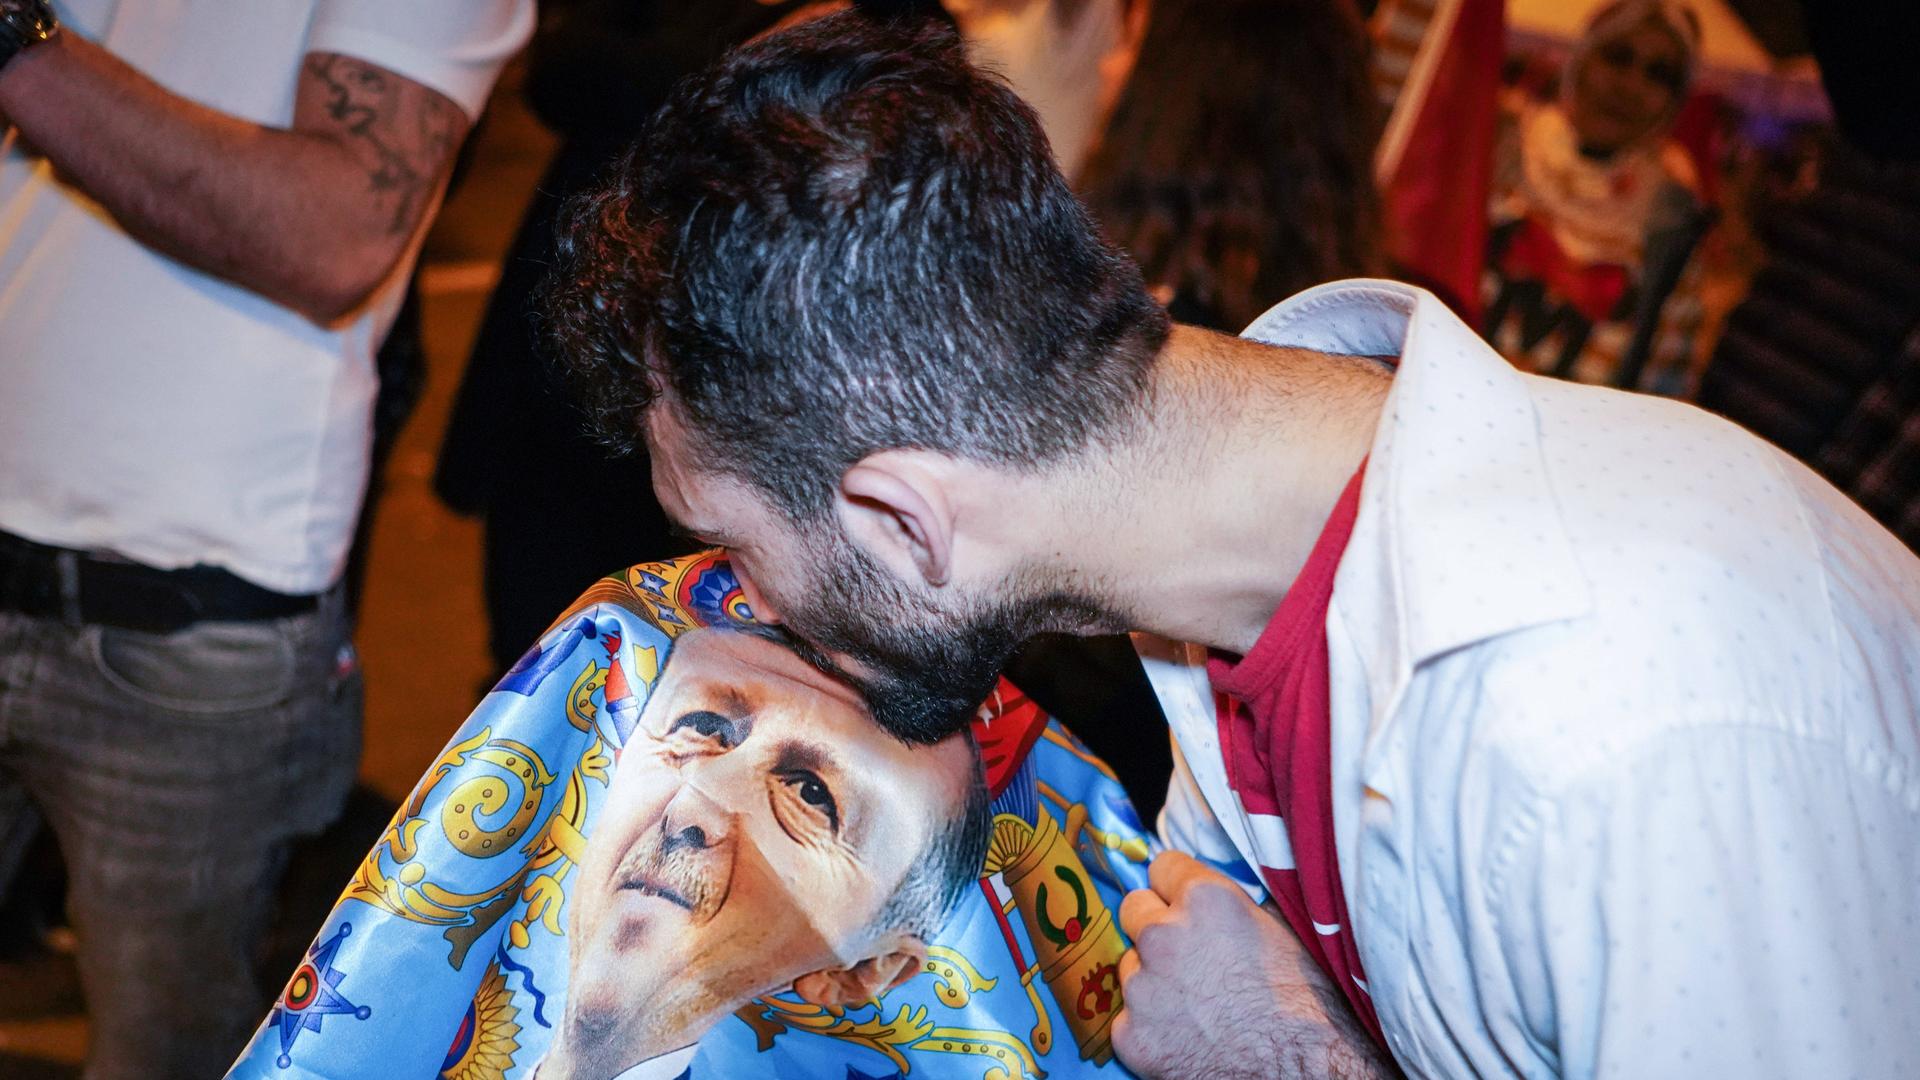 May 29, 2023, Ankara, Turkey: A man kisses the flag with the portrait of Recep Tayyip Erdogan during the celebration. According to the announcement of the Supreme Election Council, Recep Tayyip Erdoan, the candidate of the People s Alliance, won the 13th Presidential elections with 52 percent of the votes against his opponent, Kemal Klcdarolu, the candidate of the Nation Alliance, and became the President of Turkey again. Erdogan supporters met at the Presidential Residence after the results. Ankara Turkey - ZUMAs197 20230529_zaa_s197_026 Copyright: xTunahanxTurhanx